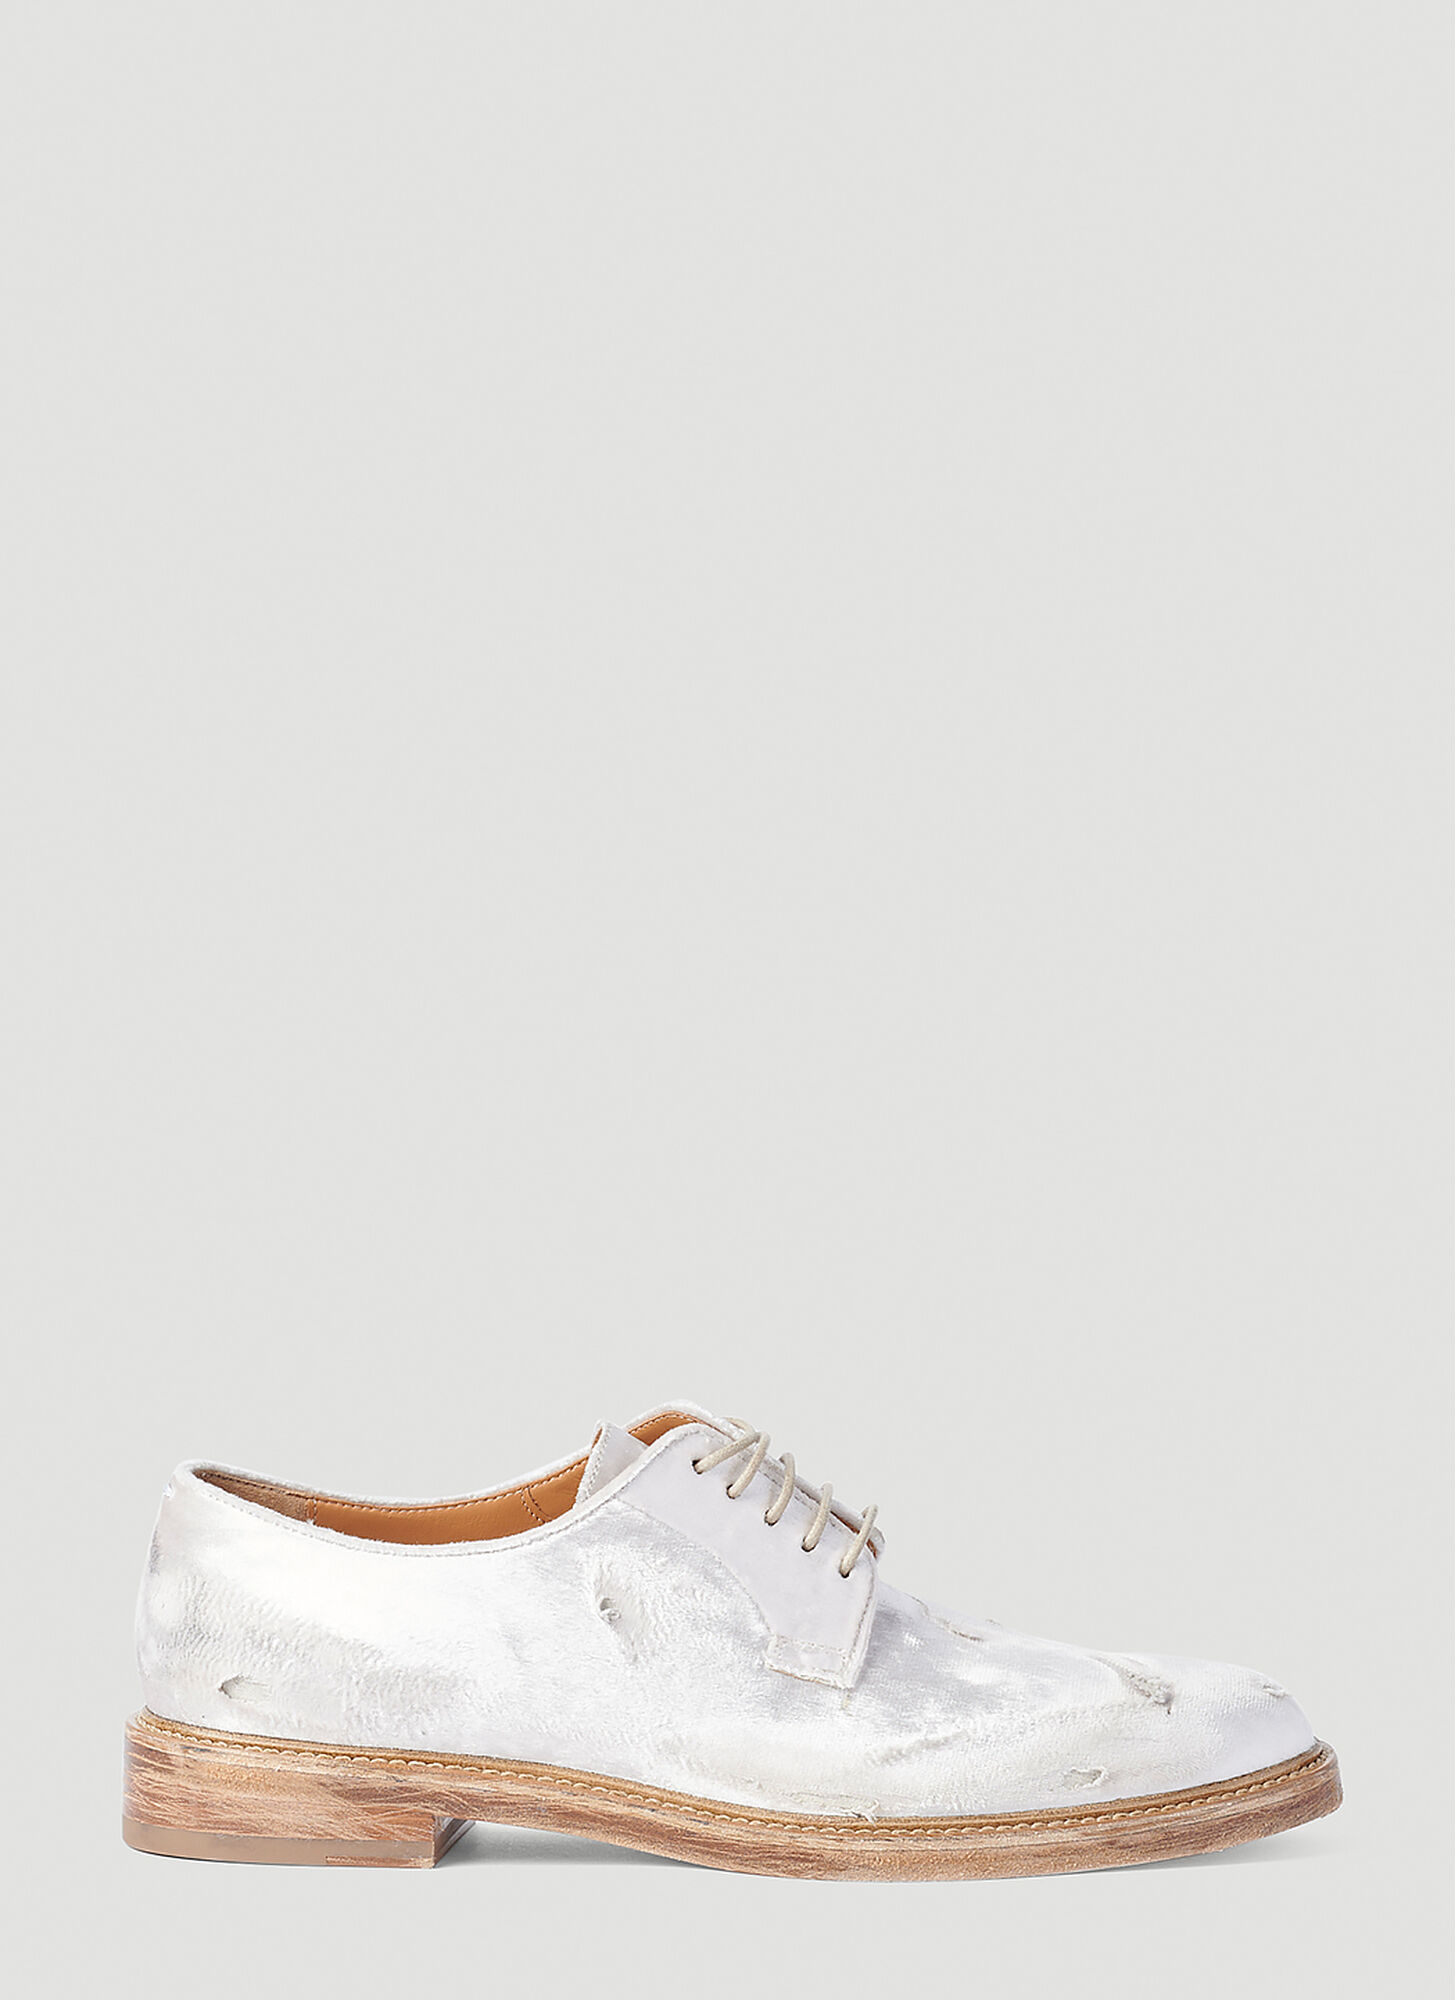 Shop Maison Margiela Distressed Oxford Shoes In White